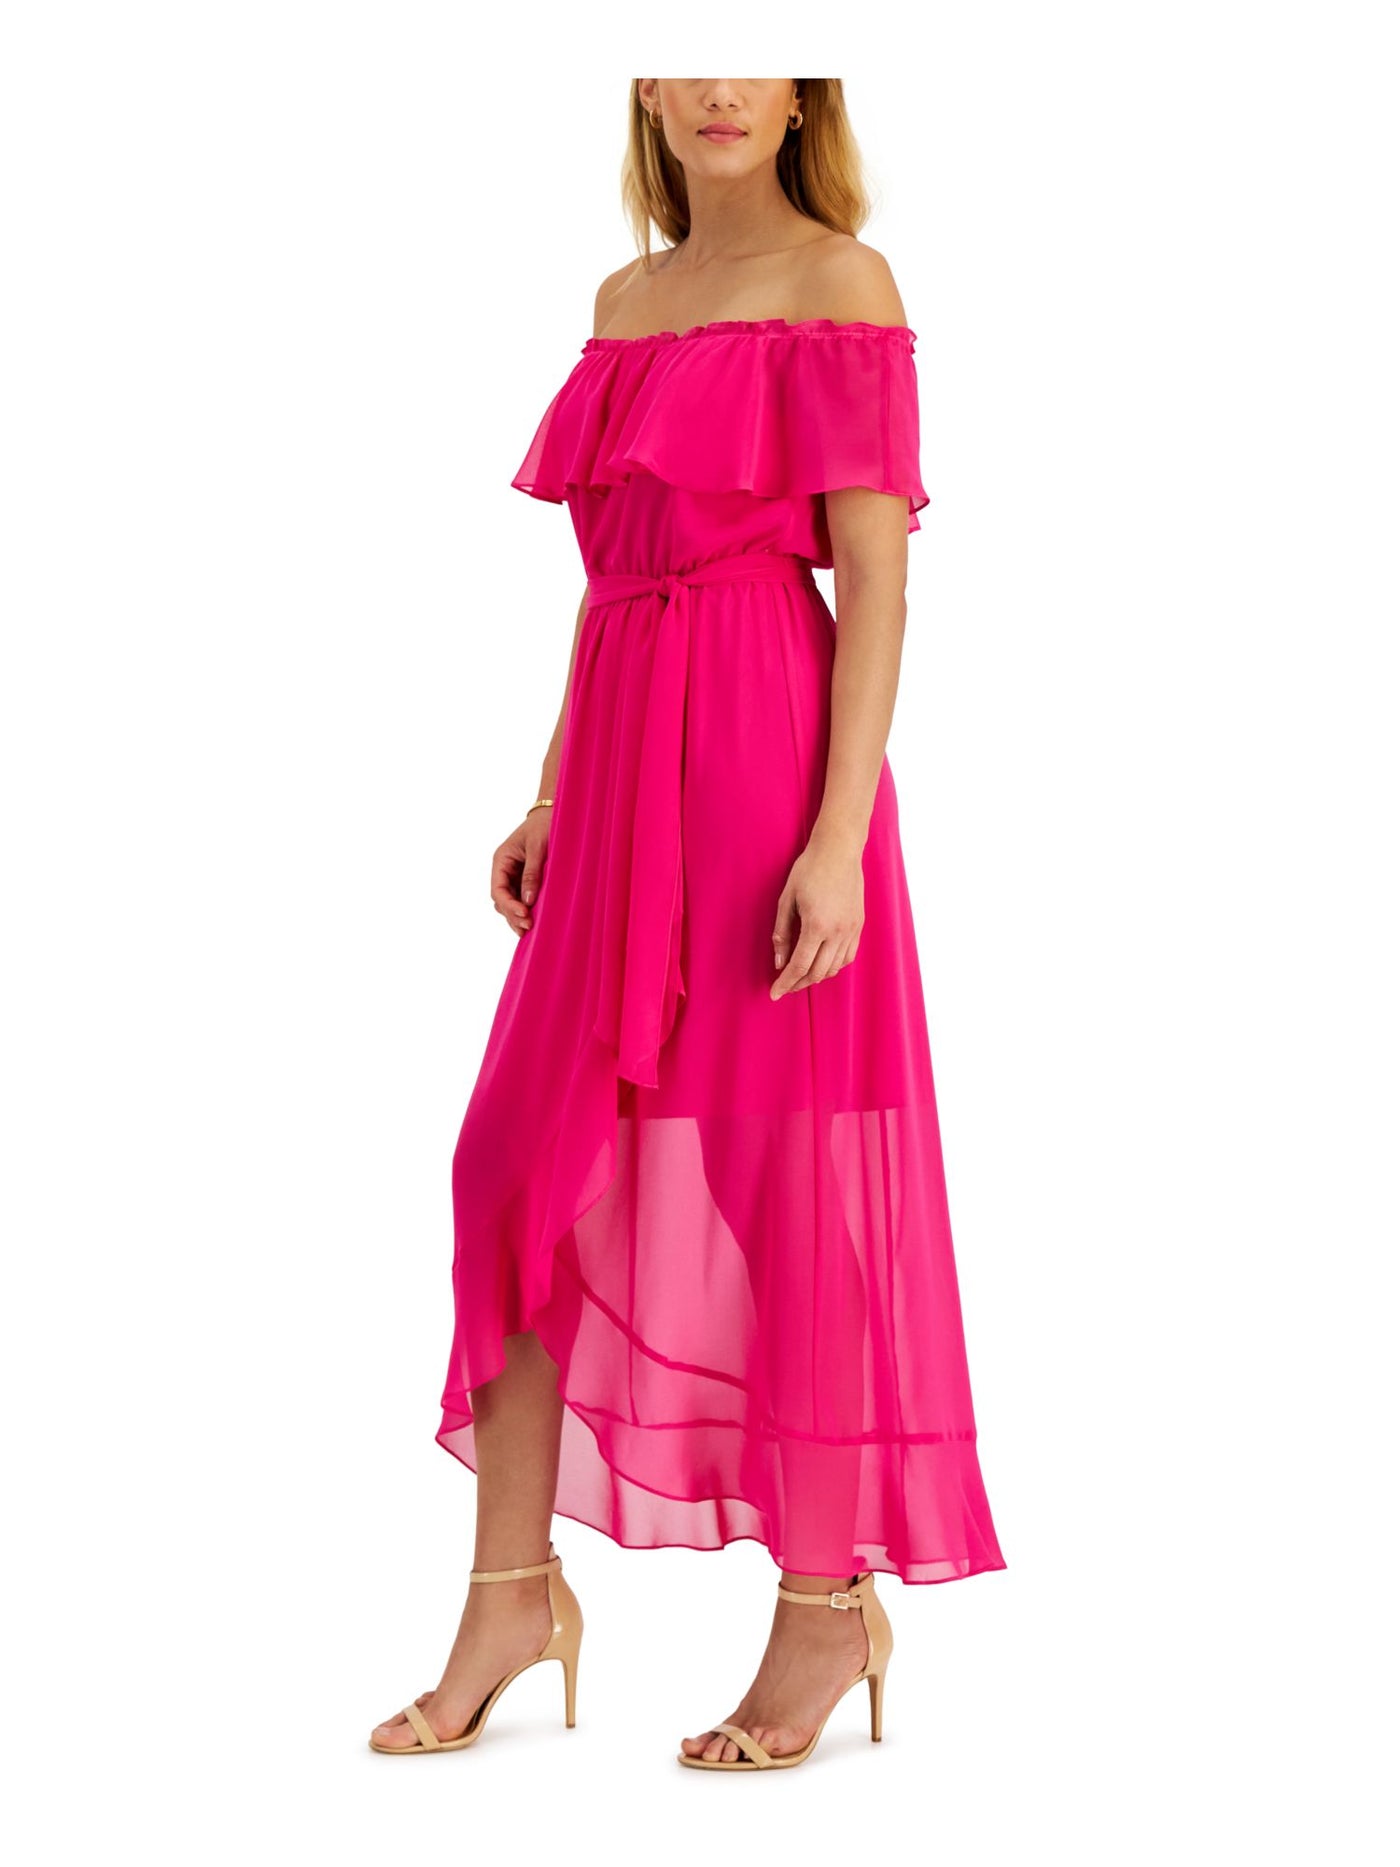 SLNY Womens Pink Ruffled Sheer Lined Tie Waist Short Sleeve Off Shoulder Maxi Party Fit + Flare Dress 8